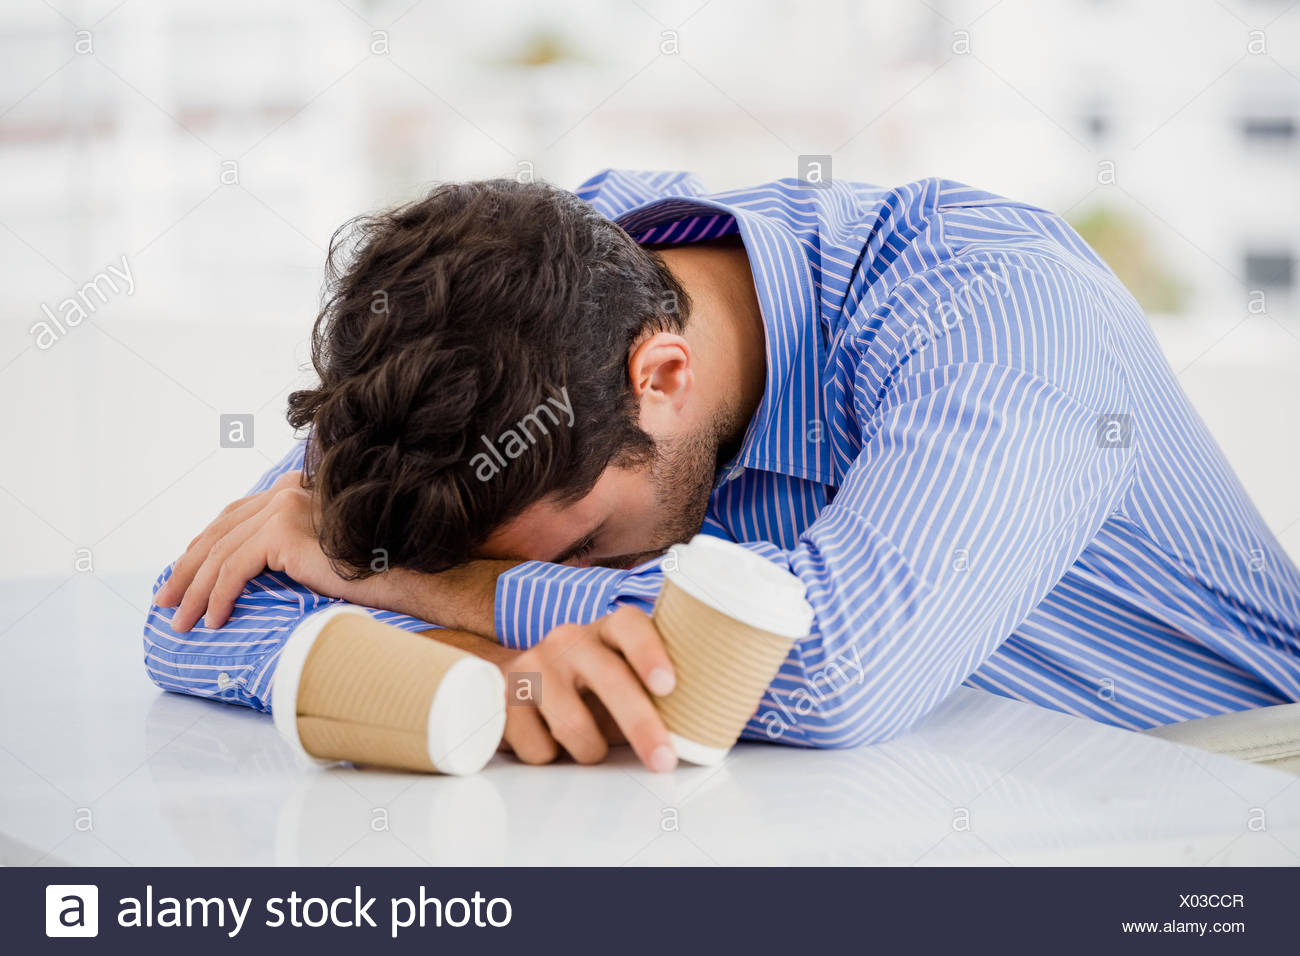 Businessman Putting His Head Down On Desk Stock Photo 275441511